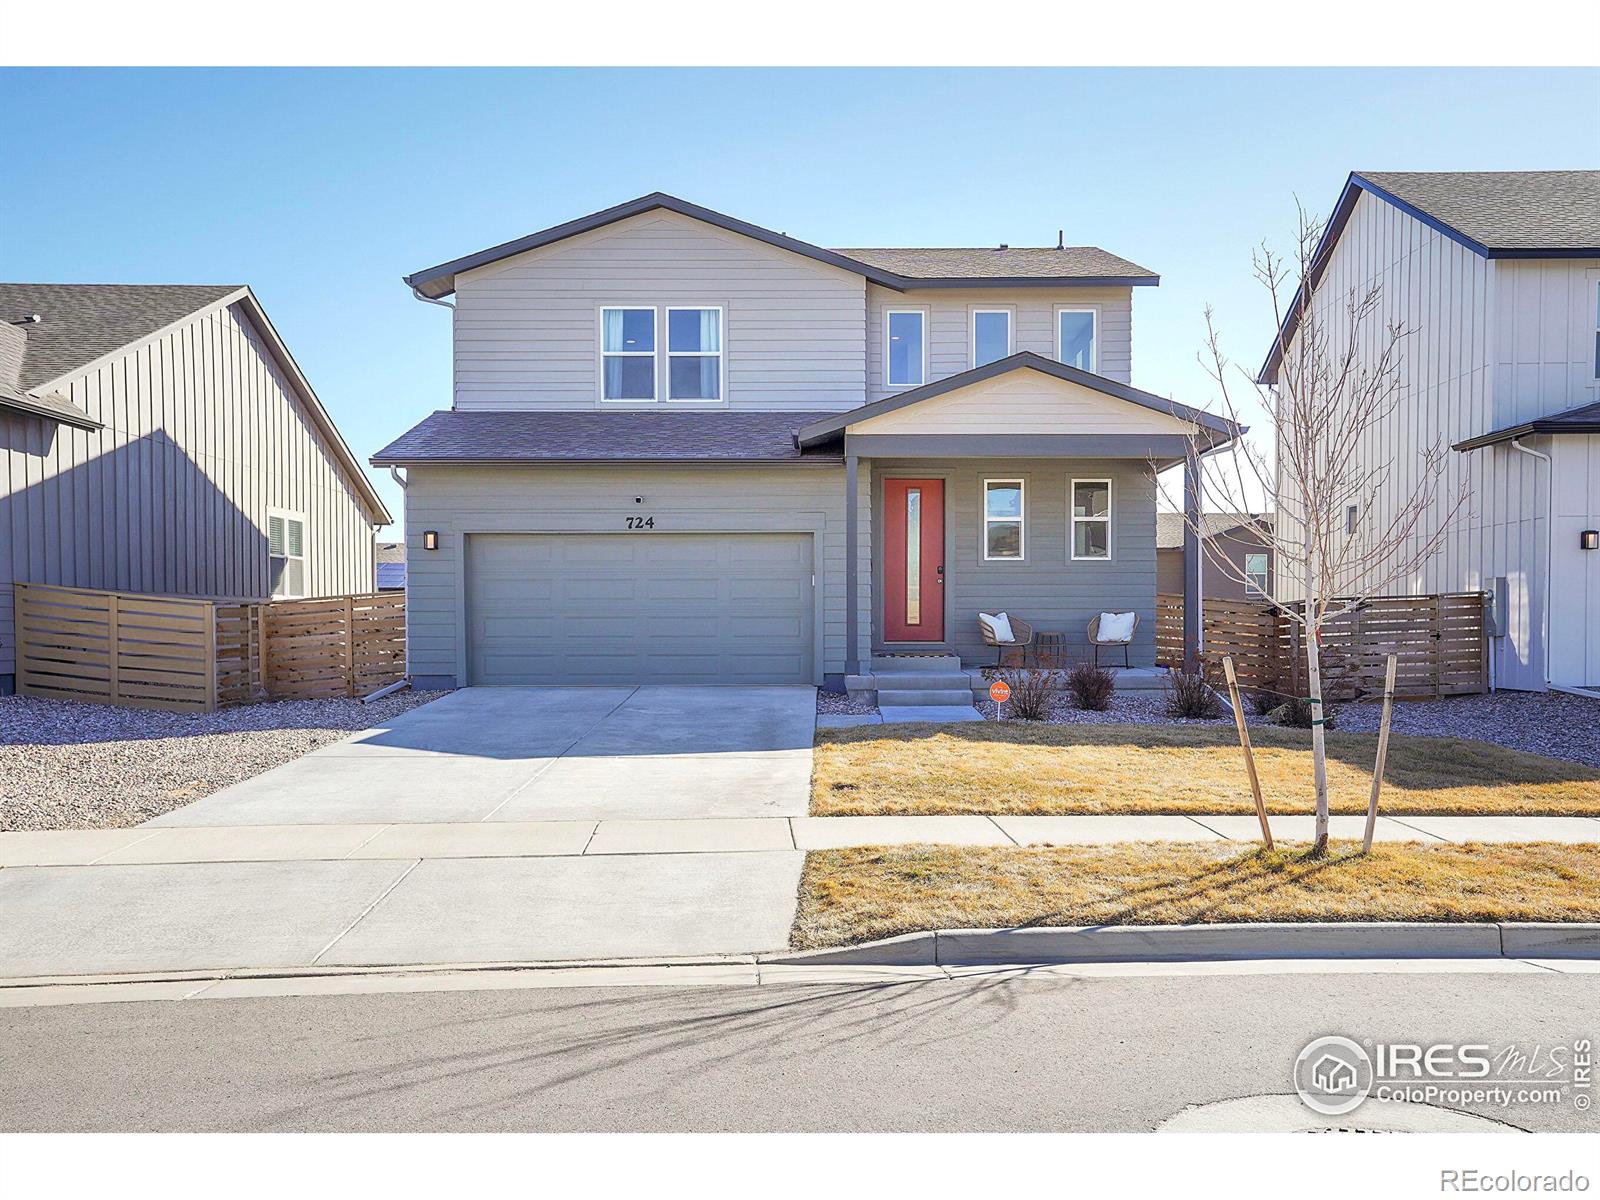 724  67th Avenue, greeley MLS: 4567891004198 Beds: 3 Baths: 3 Price: $515,000